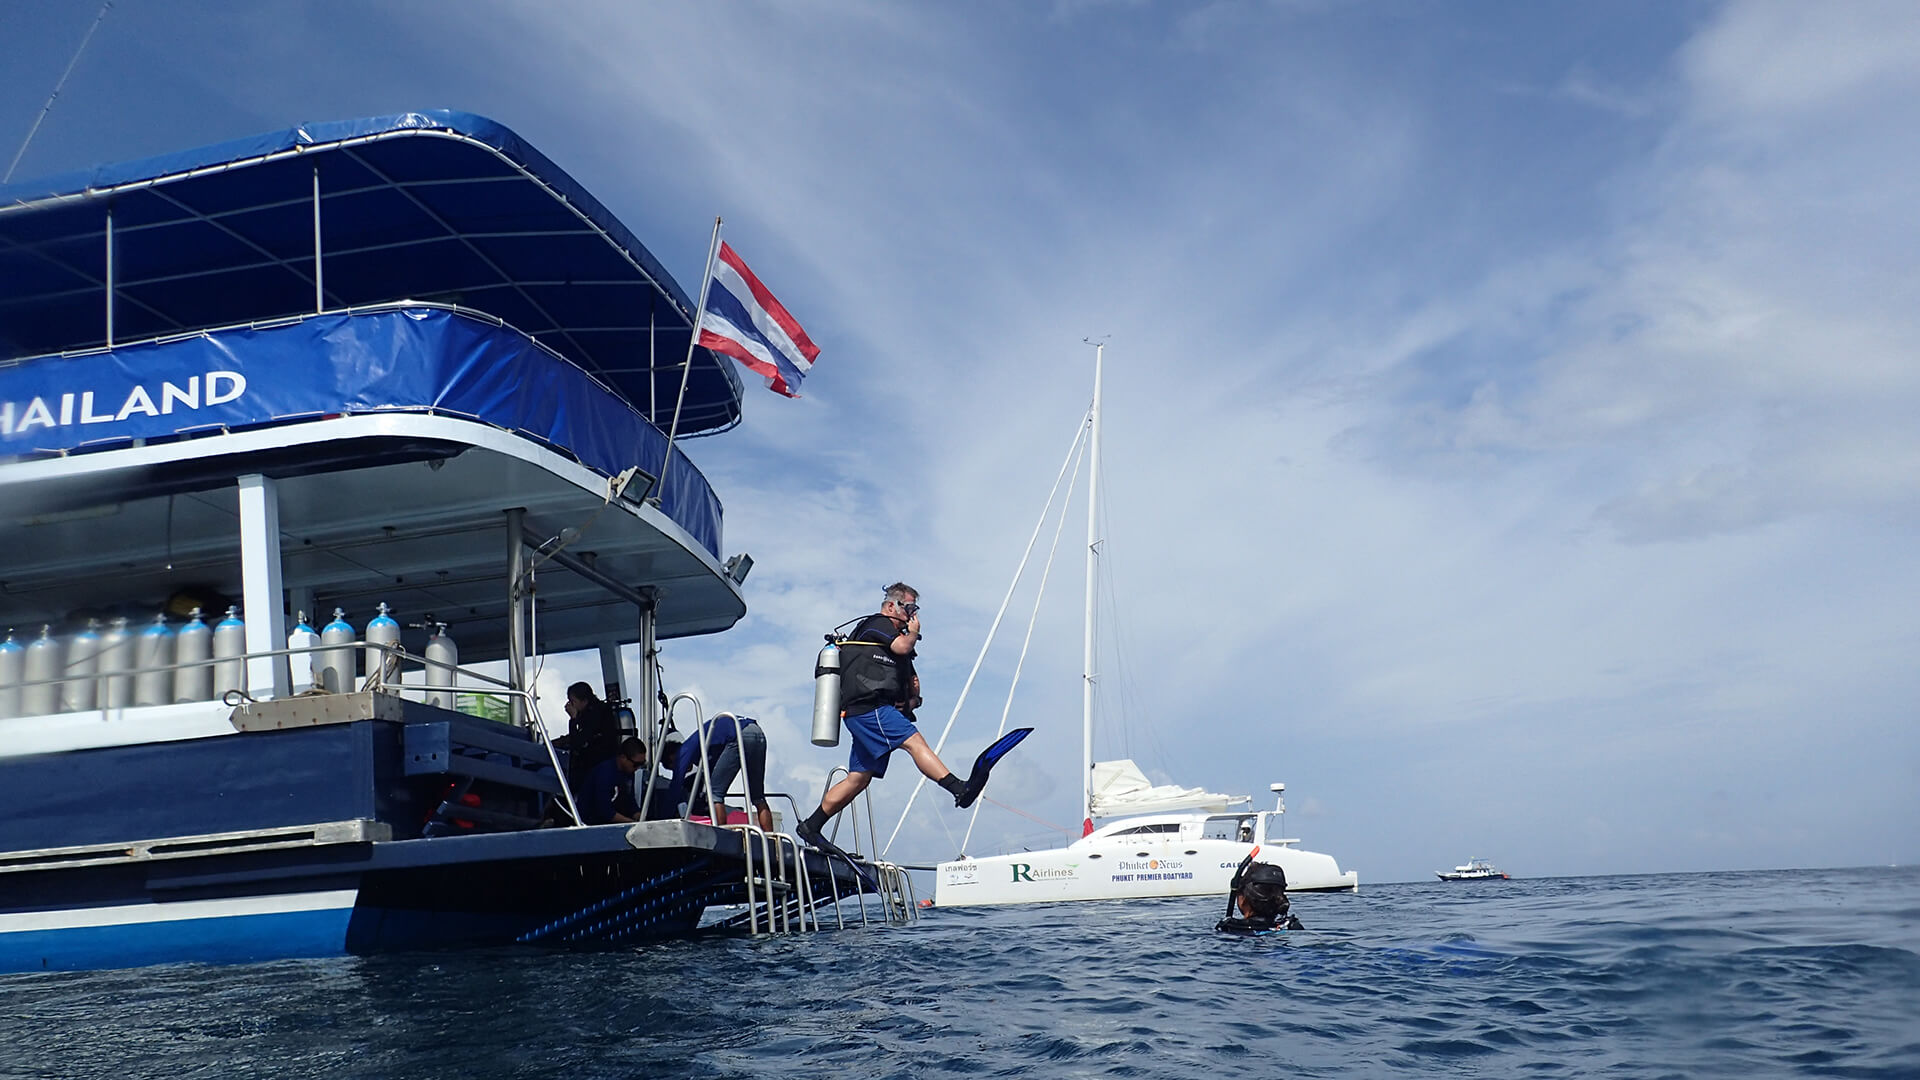 How Do I Become A PADI Scuba Diving Instructor In Phuket?